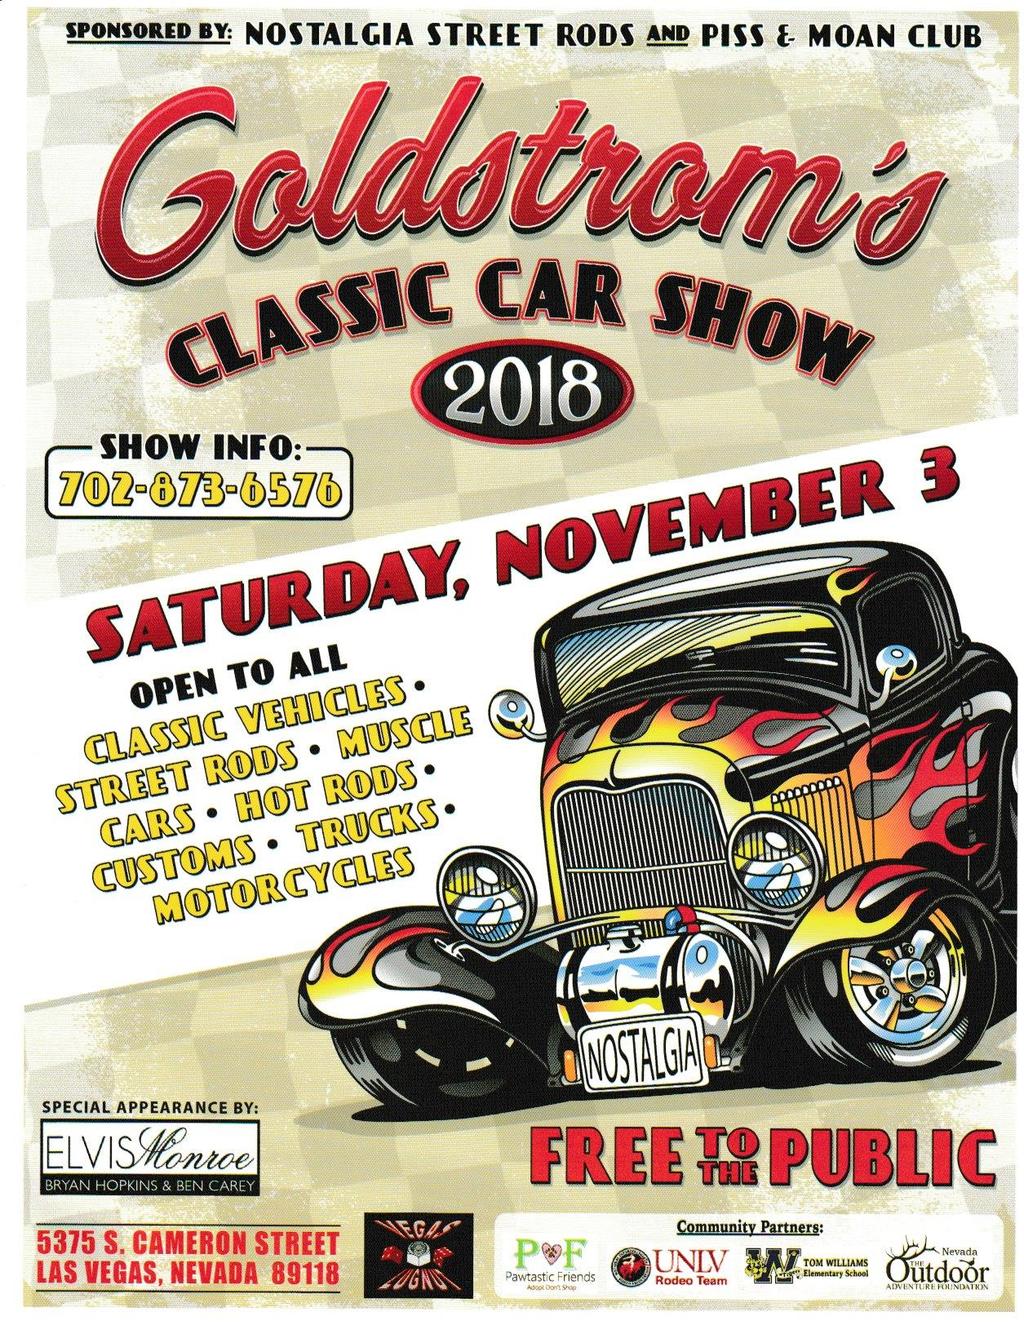 OCTOBER 2018 - SCHEDULE OF EVENTS Continued: 10/30 11/2 SEMA Show, Las Vegas Convention